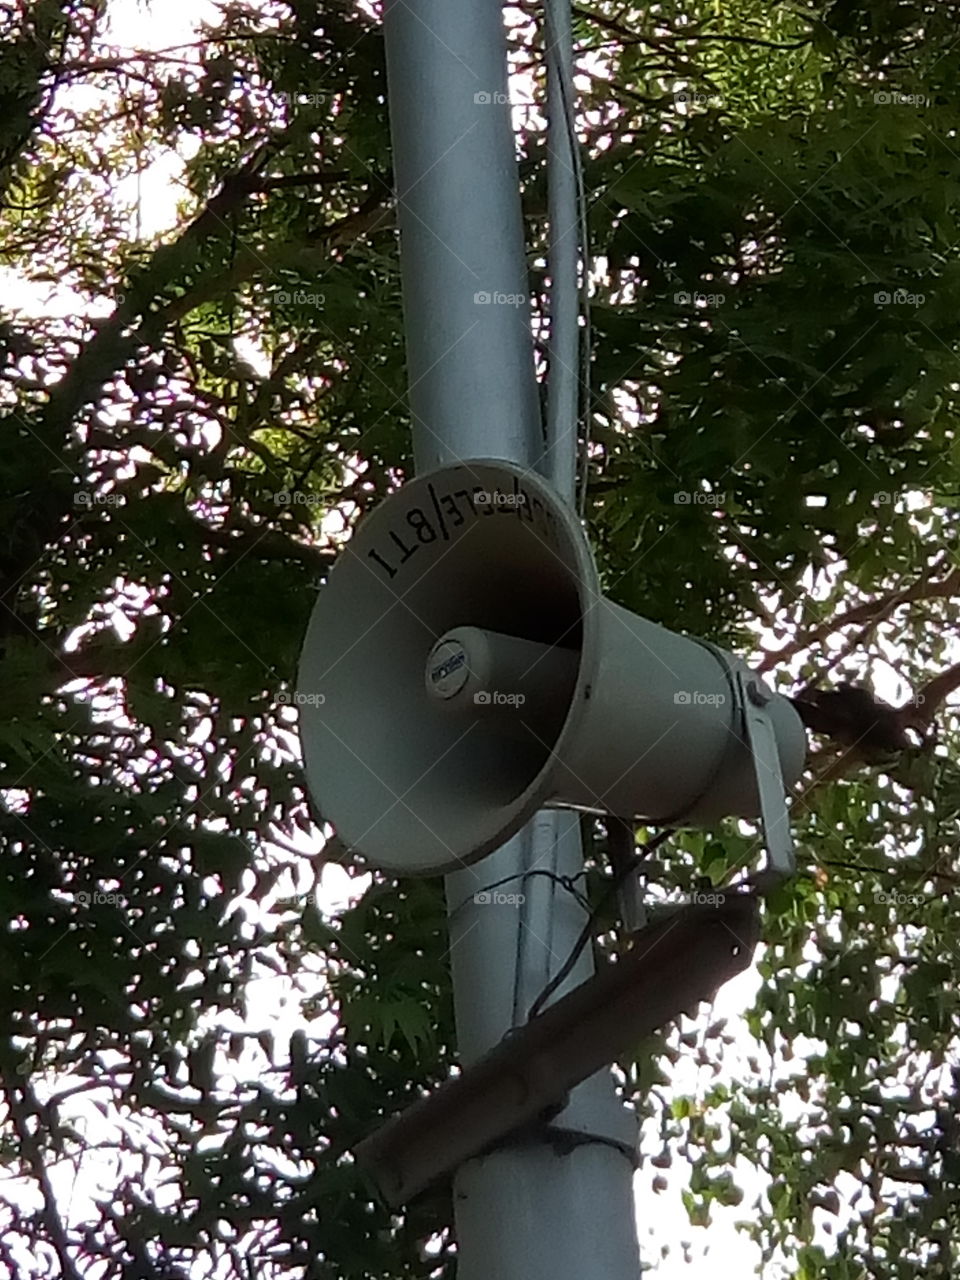 an anouncemement speaker at railway staion.